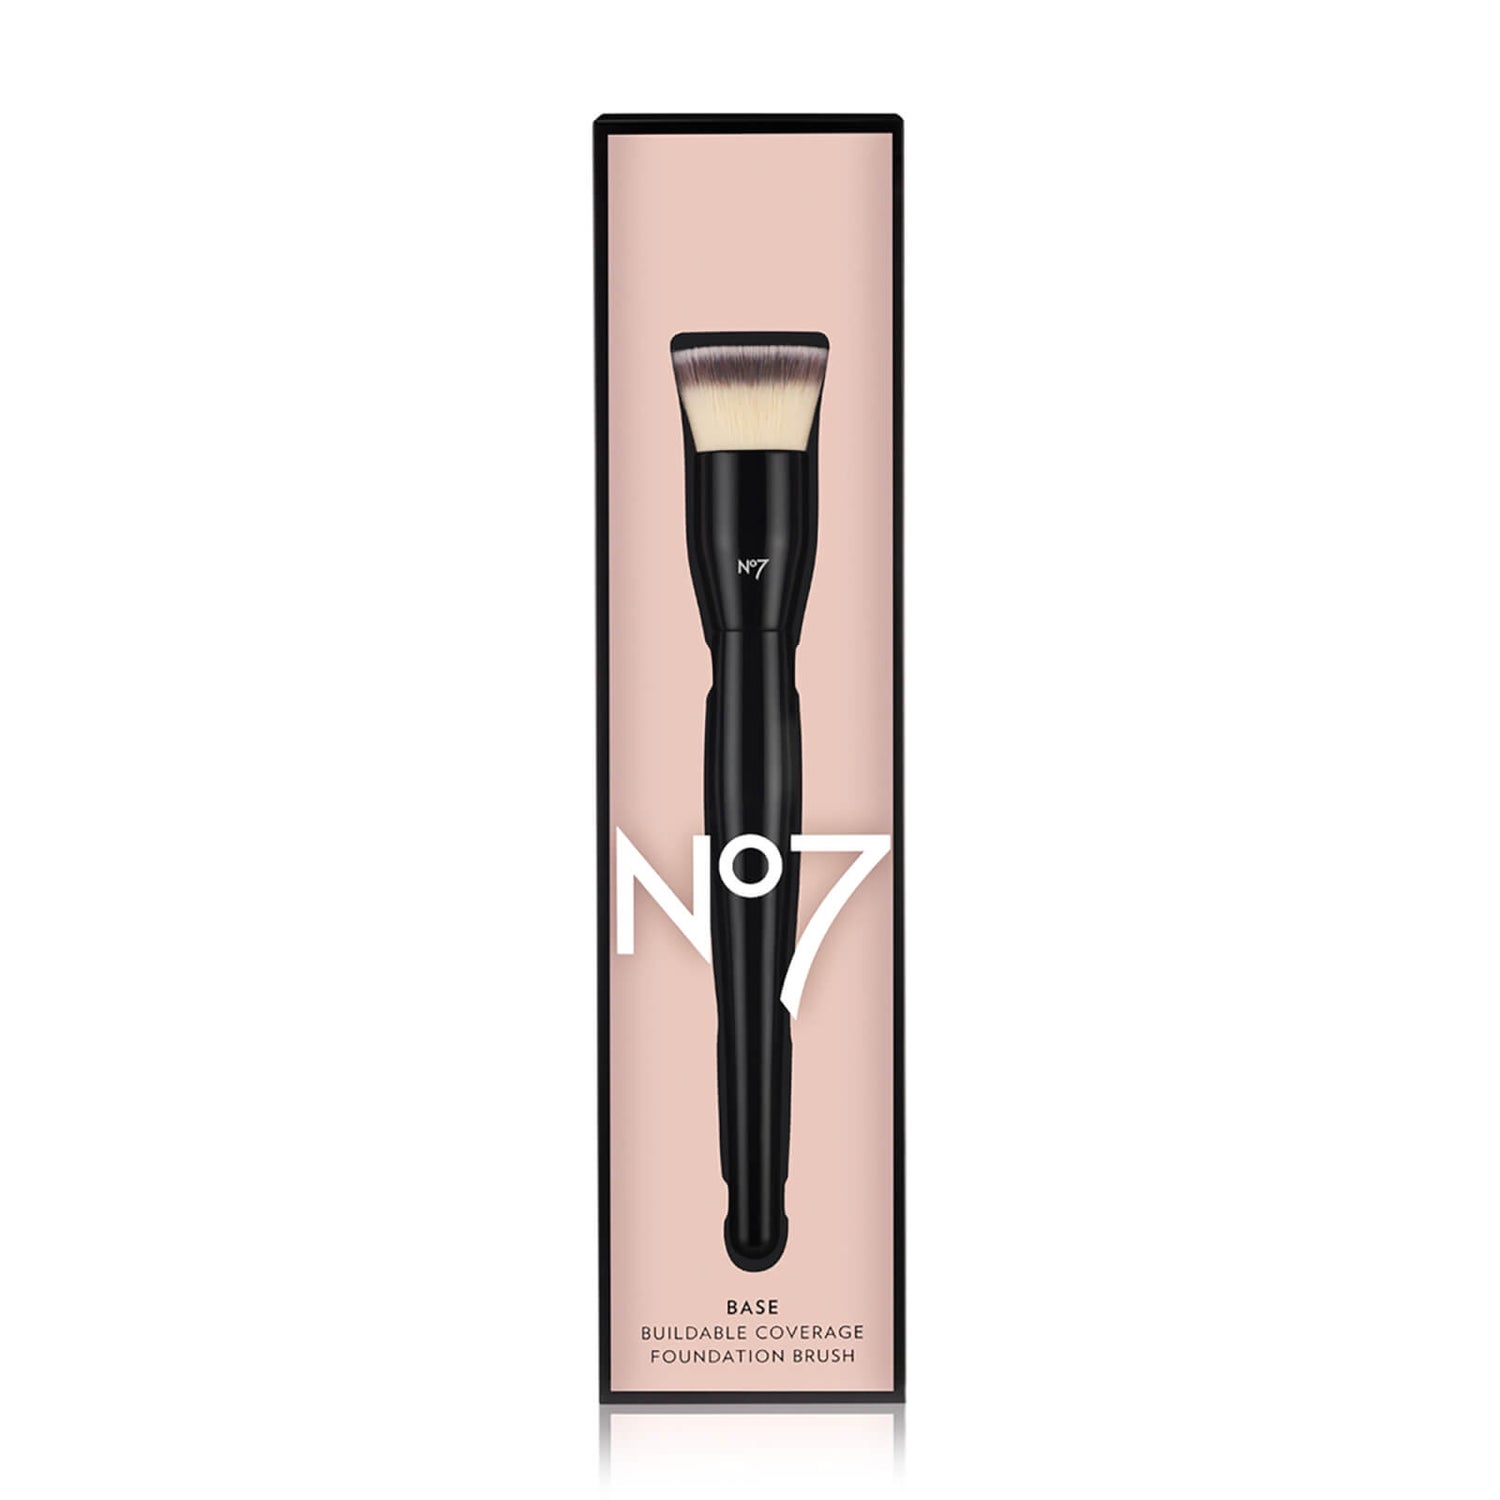 Buildable Coverage Foundation Brush